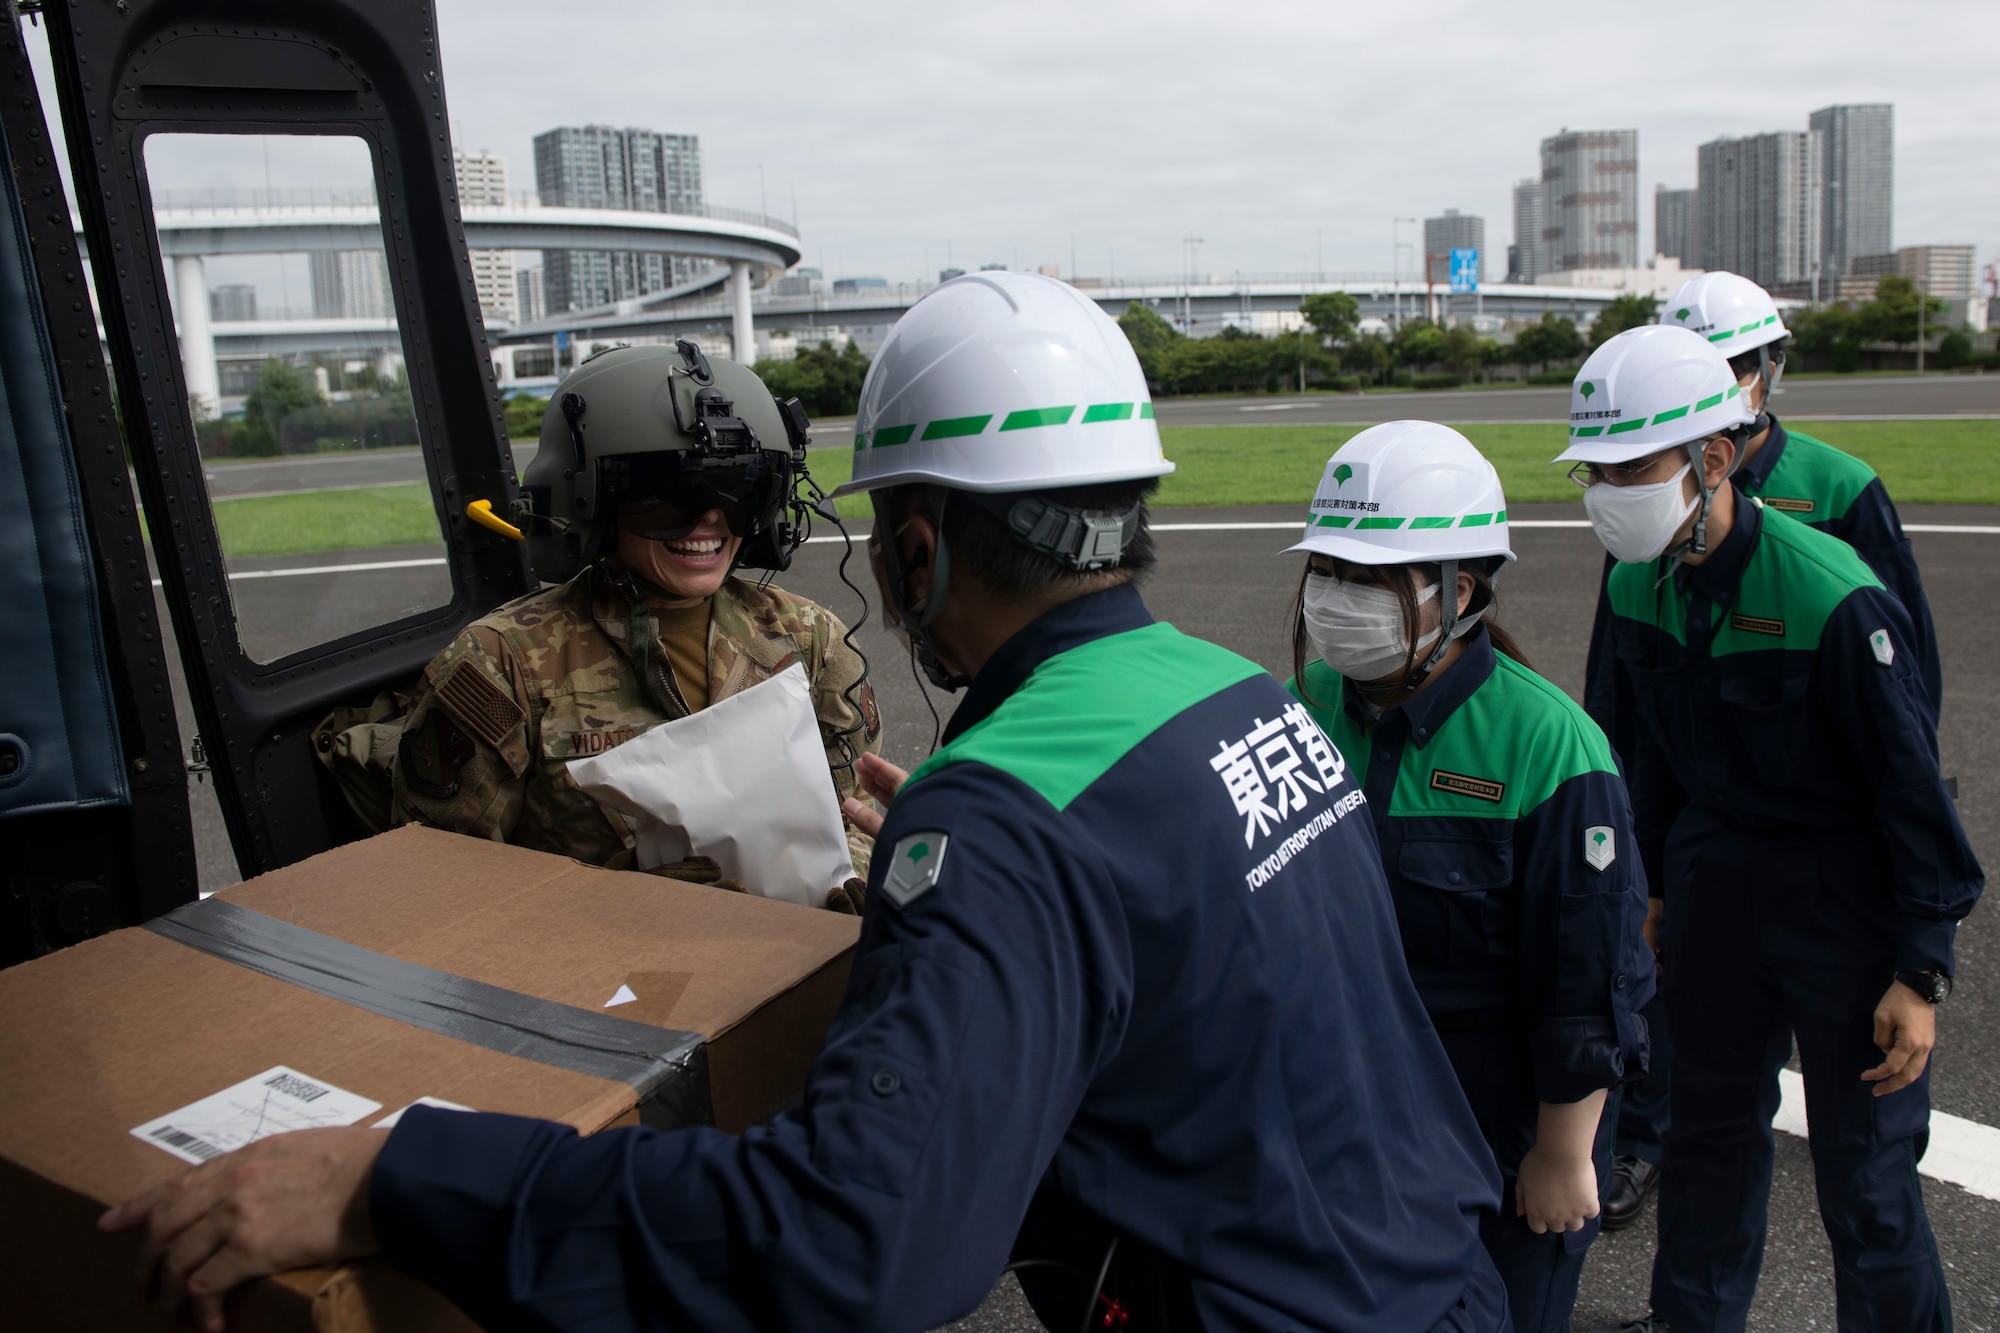 Tech. Sgt. Alexandra Vidato, 459th Airlift Squadron instructor flight engineer, assists Tokyo Metropolitan Government personal with a box of simulated humanitarian aid during a disaster preparedness and response drill at Tokyo Rinkai Disaster Prevention Park, Japan, Sept. 3, 2022. To further build upon the partnership with the TMG, the 459th is planning to participate in more disaster relief training in the future. (U.S. Air Force photo by Tech. Sgt. Joshua Edwards)